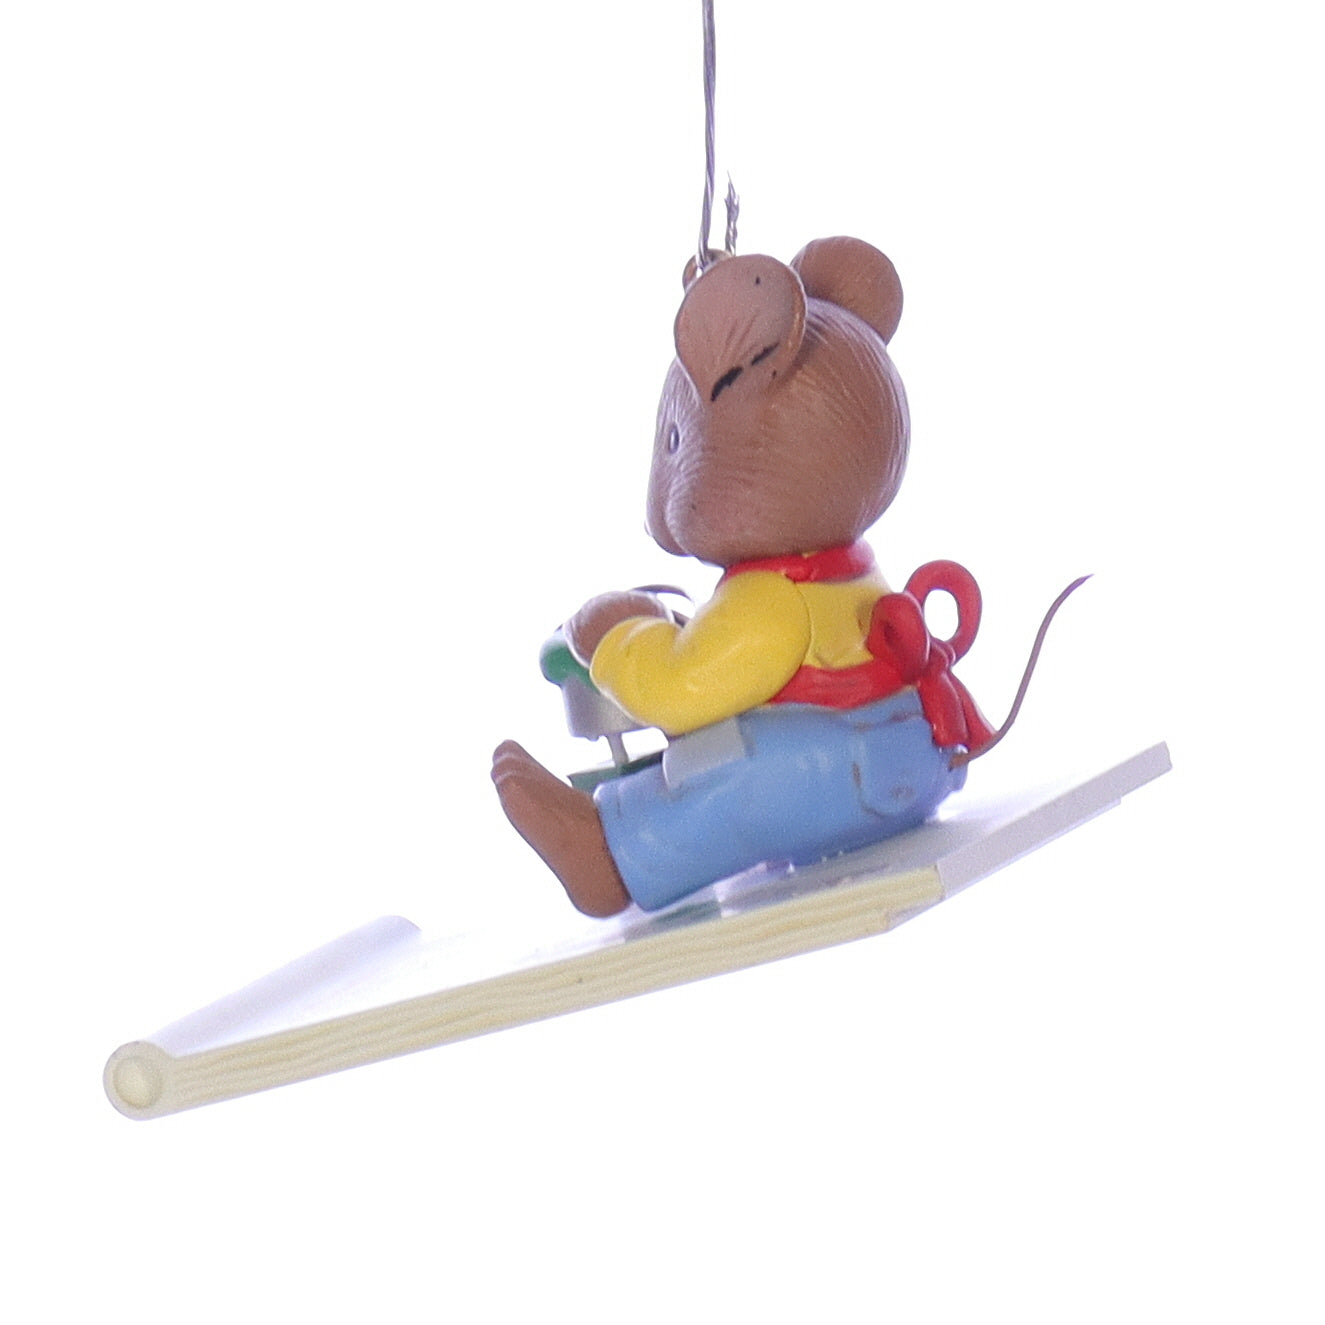 Enesco_Treasury_of_Christmas_Ornaments_595551_Paint_Your_Holiday_Bright_Mouse_Ornament_1994 Back View